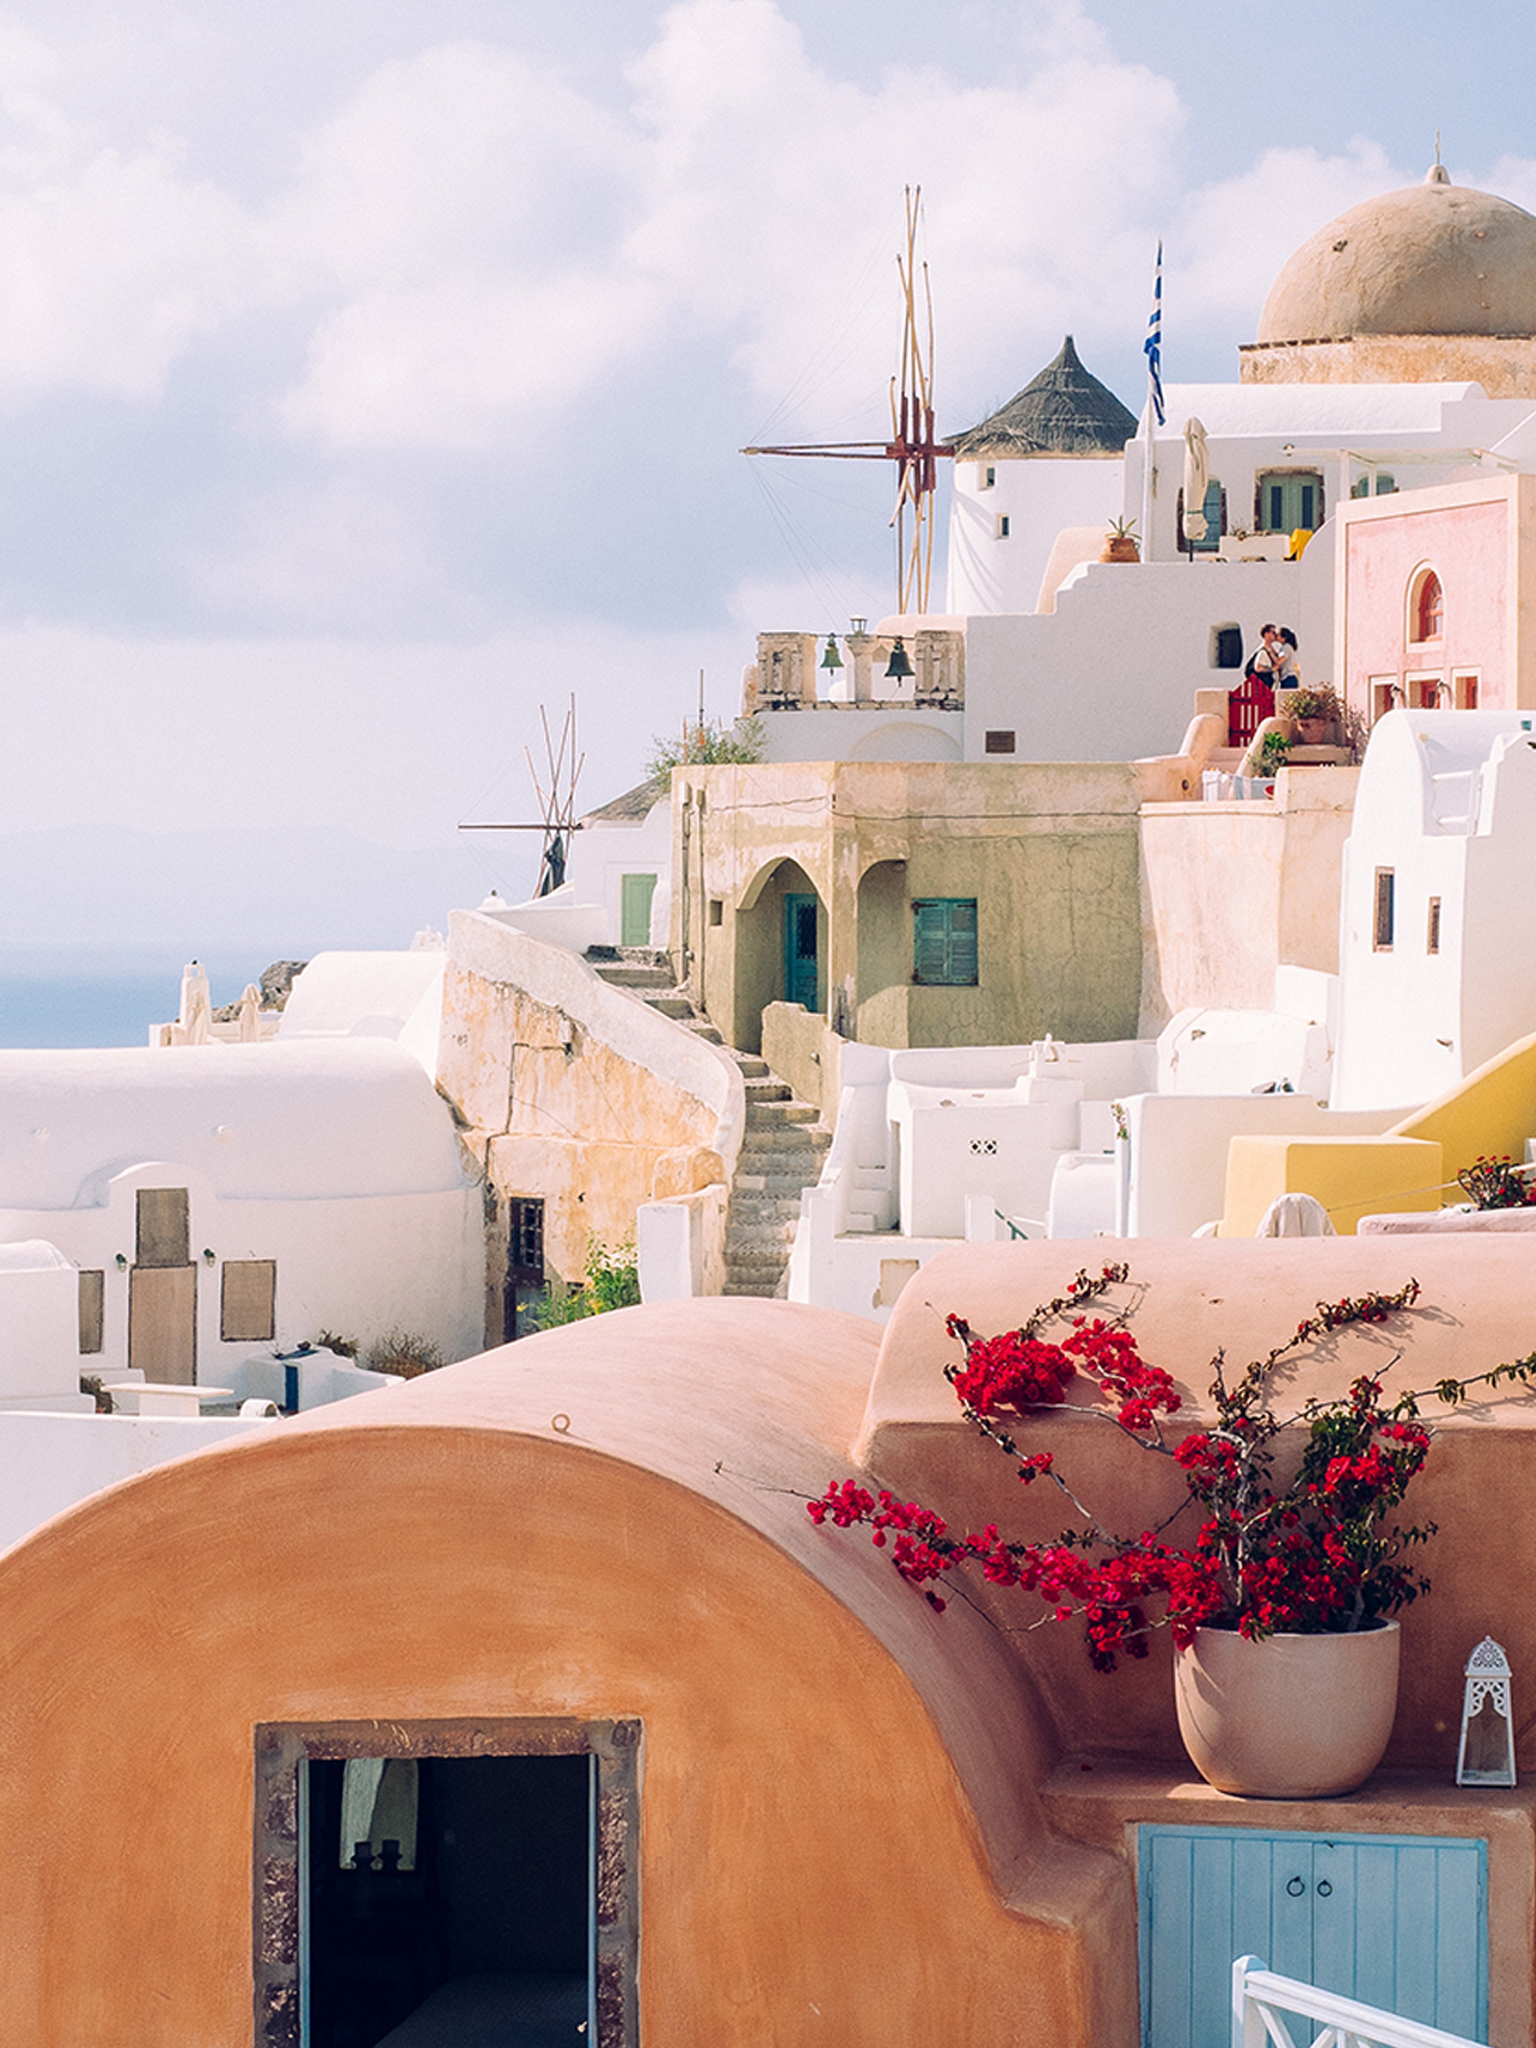 Travel to Athens & Santorini for a 5 day gastronomic journey that will introduce you to Greek cuisine